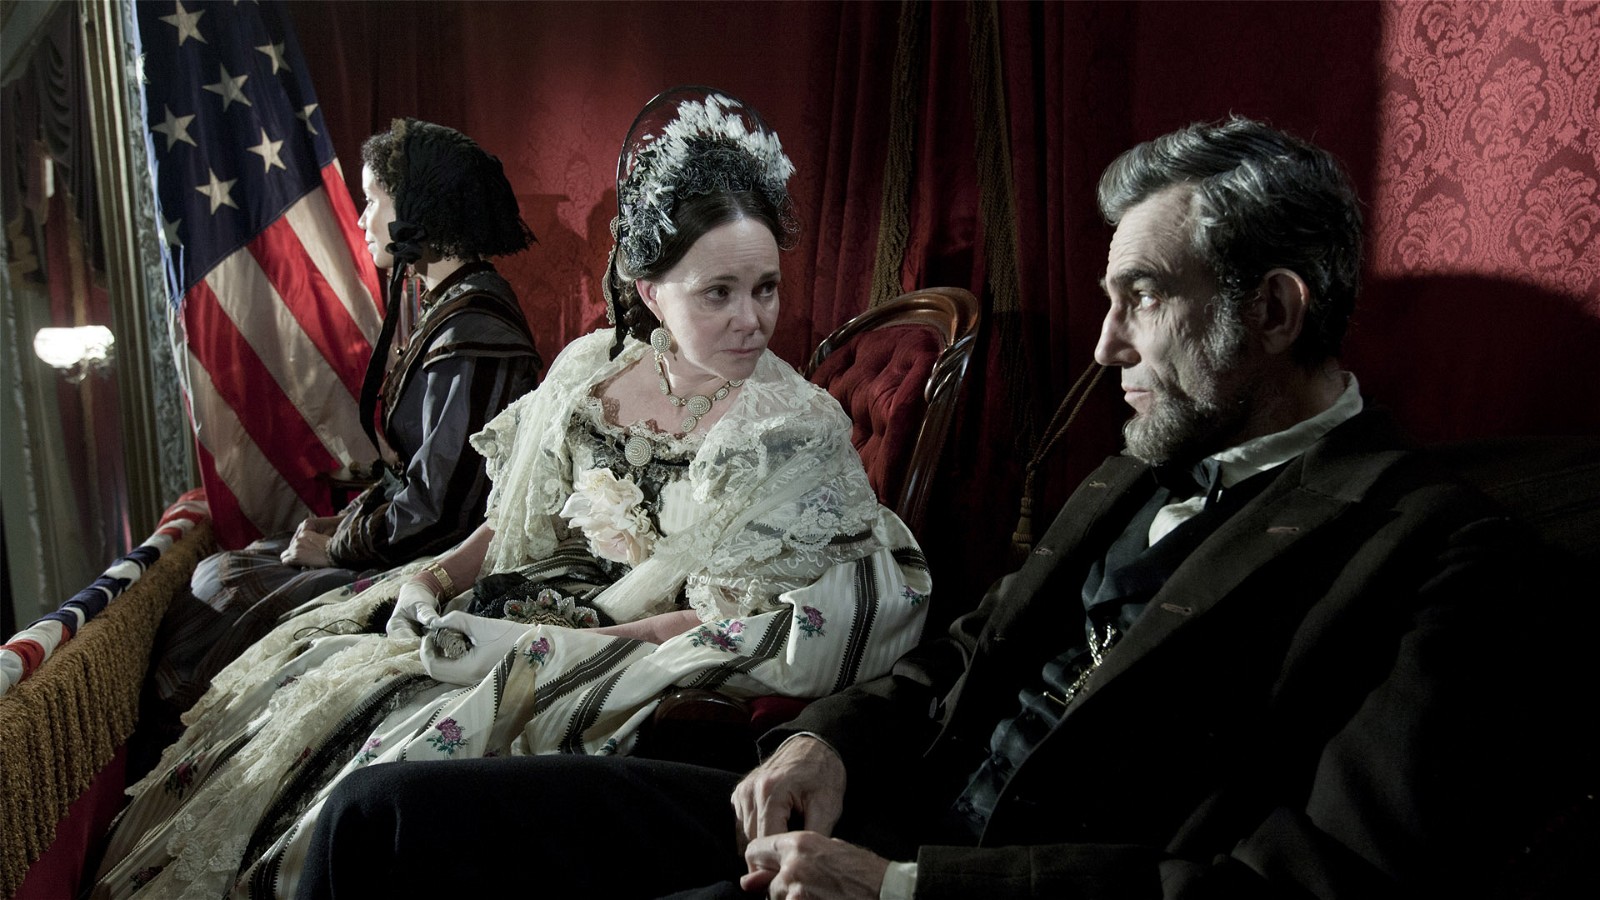 Daniel Day-Lewis and Sally Field in Lincoln